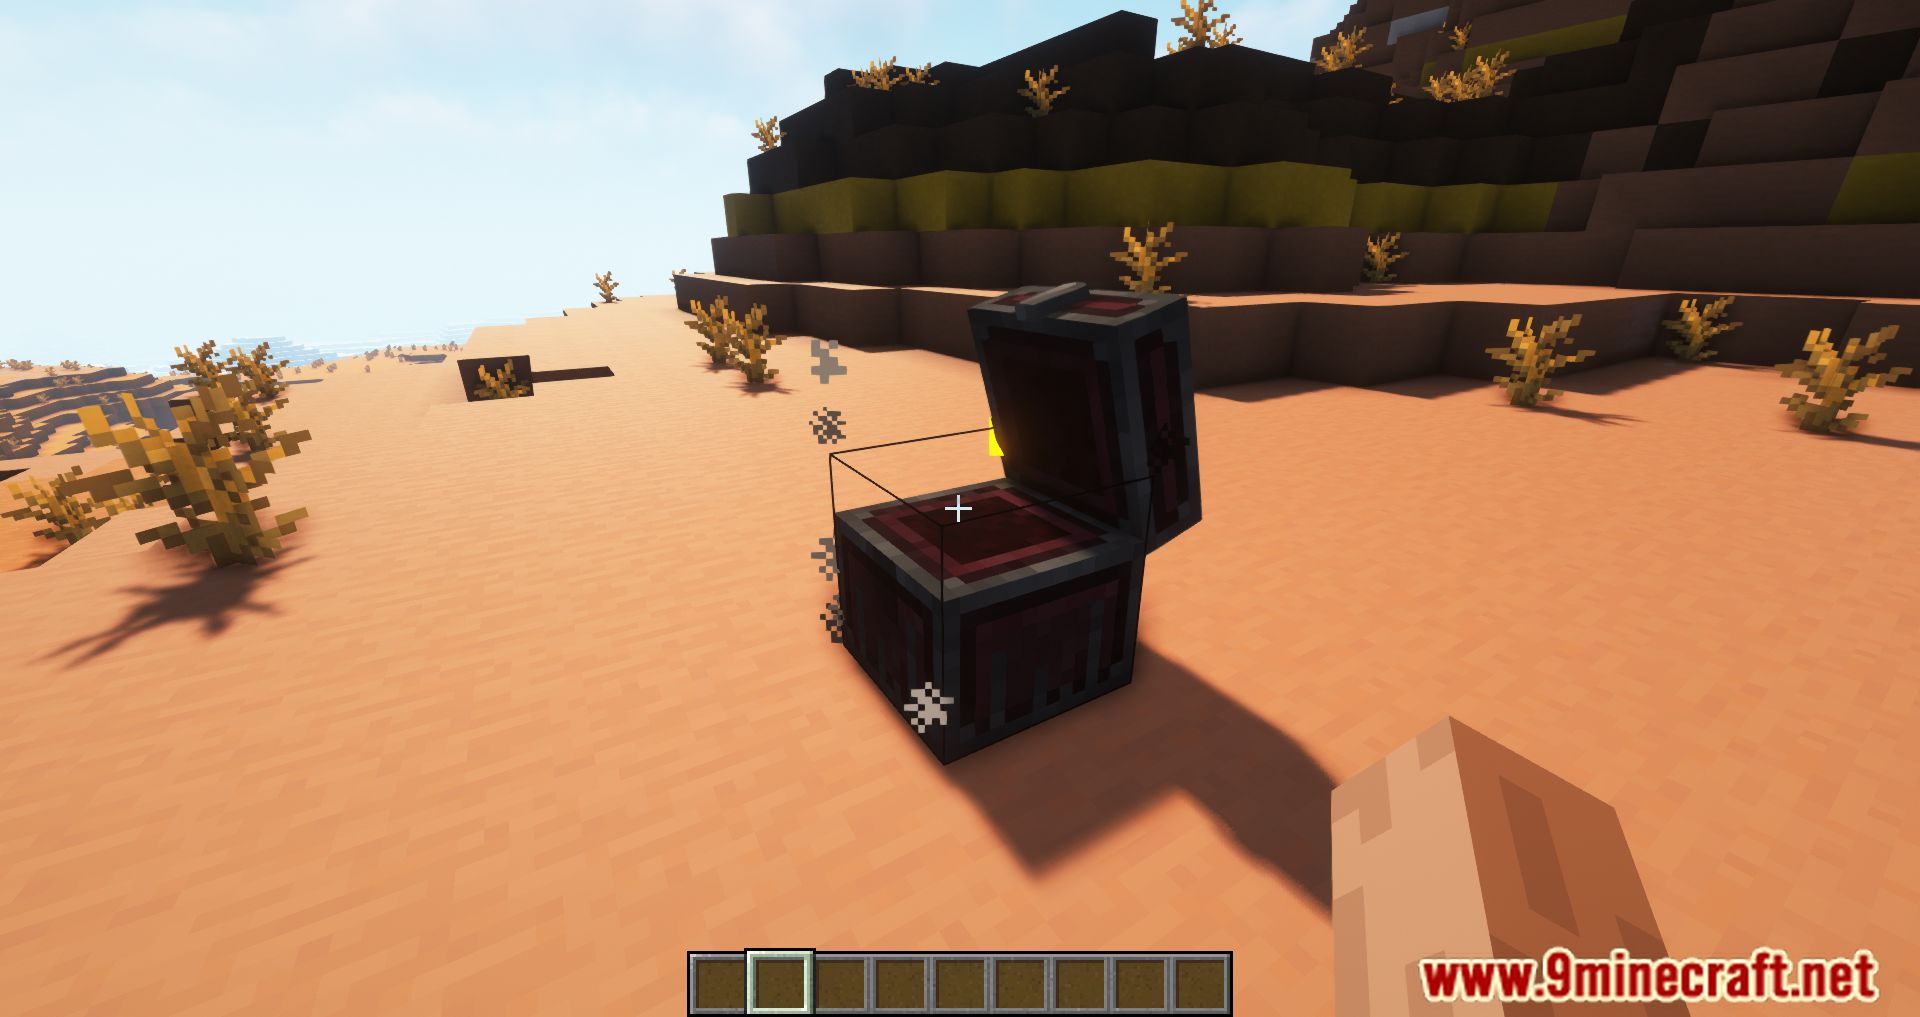 Variant Chests Mod (1.20.4, 1.19.4) - From Crafting To Aesthetics 